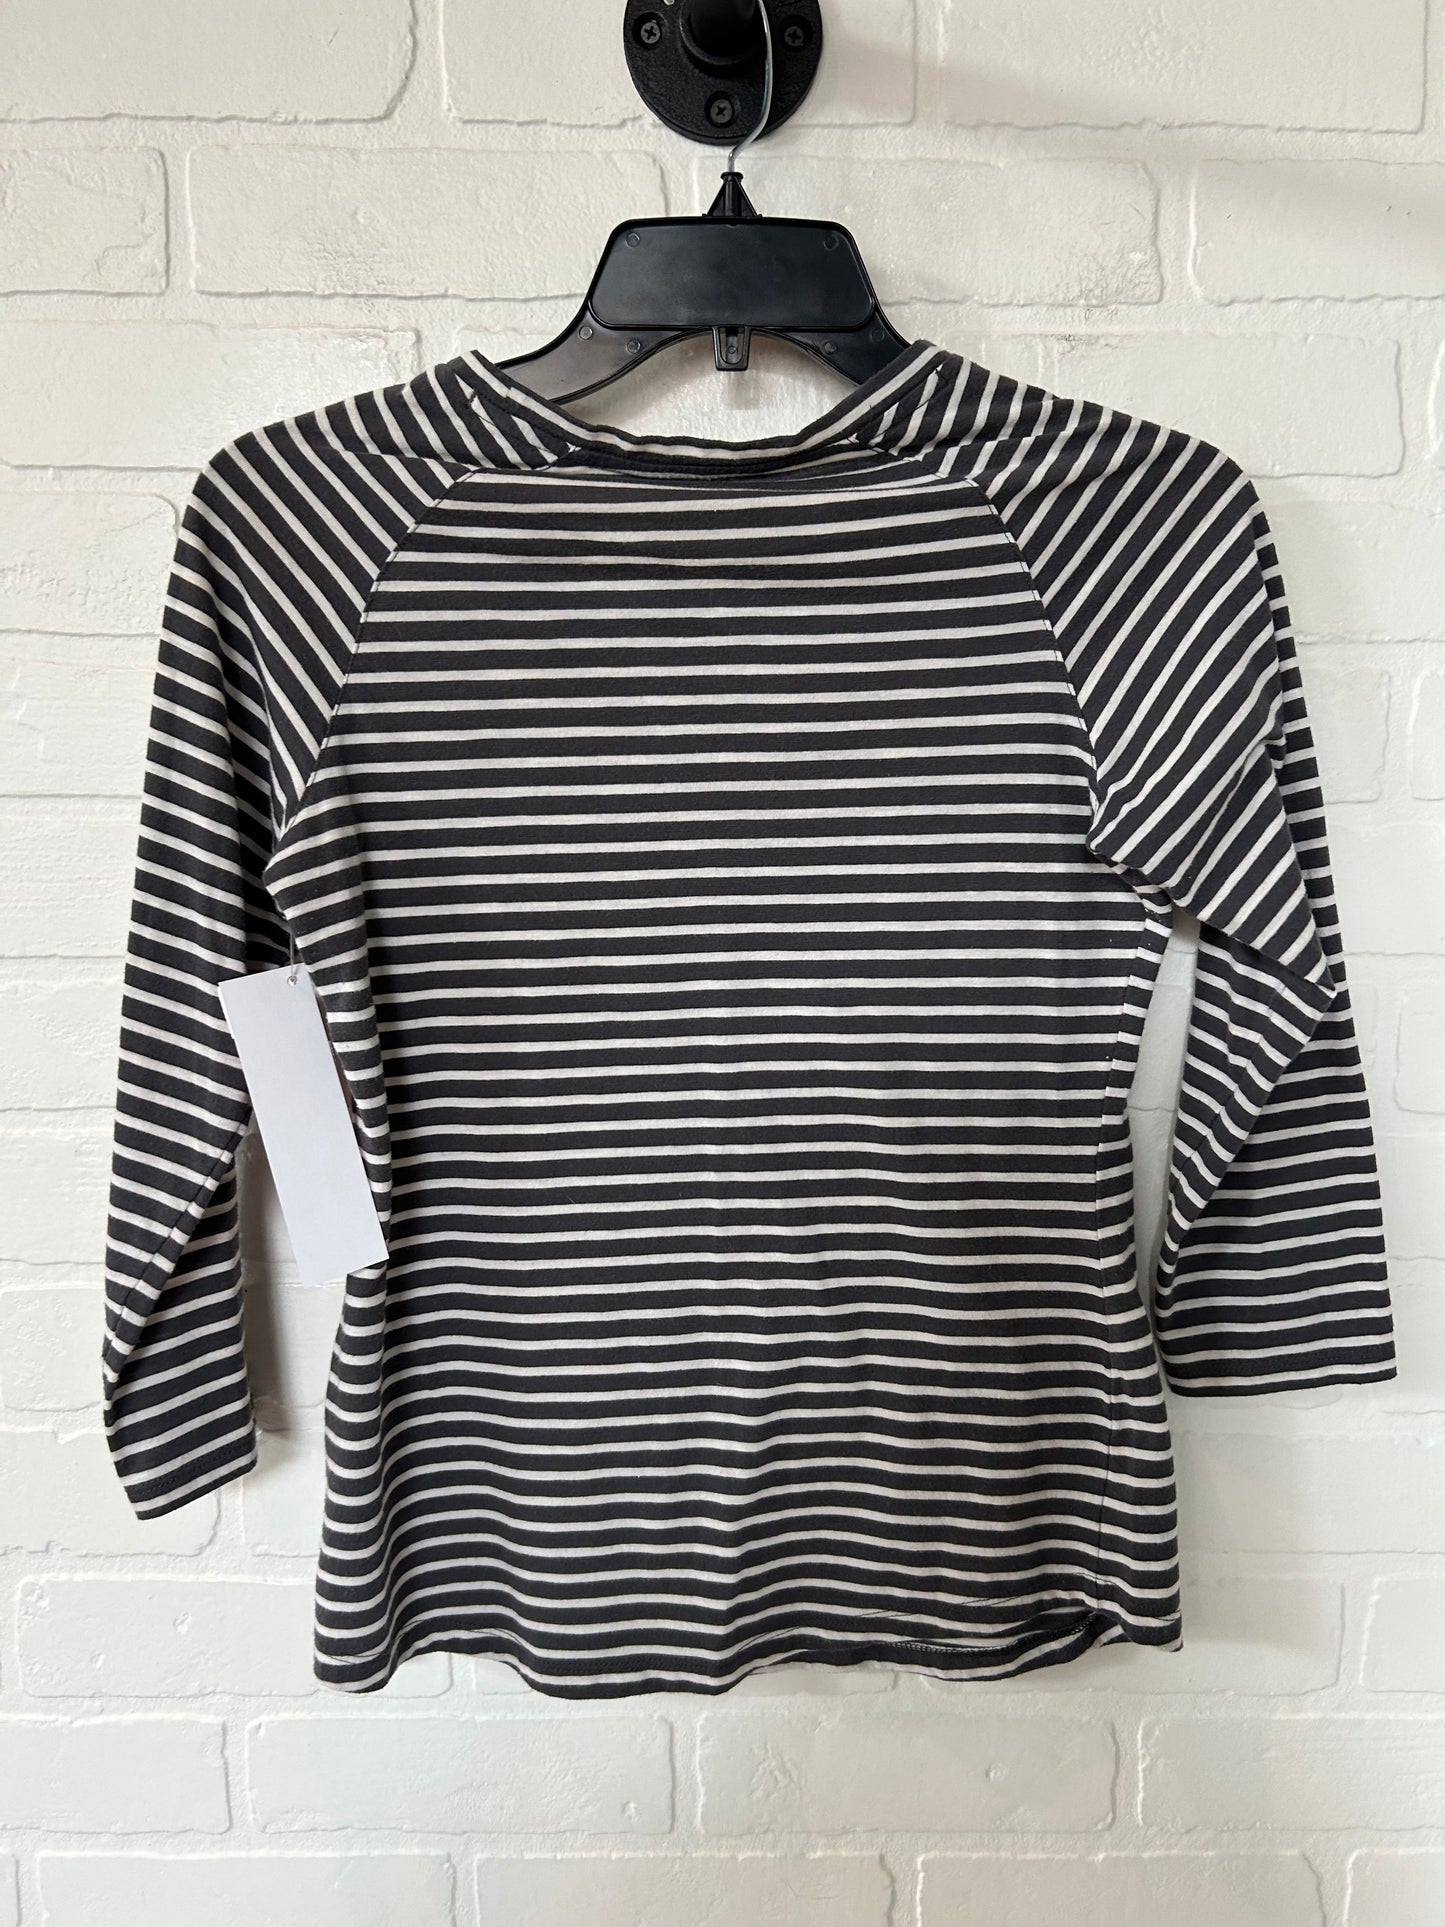 Striped Top Long Sleeve Basic Columbia, Size Xs